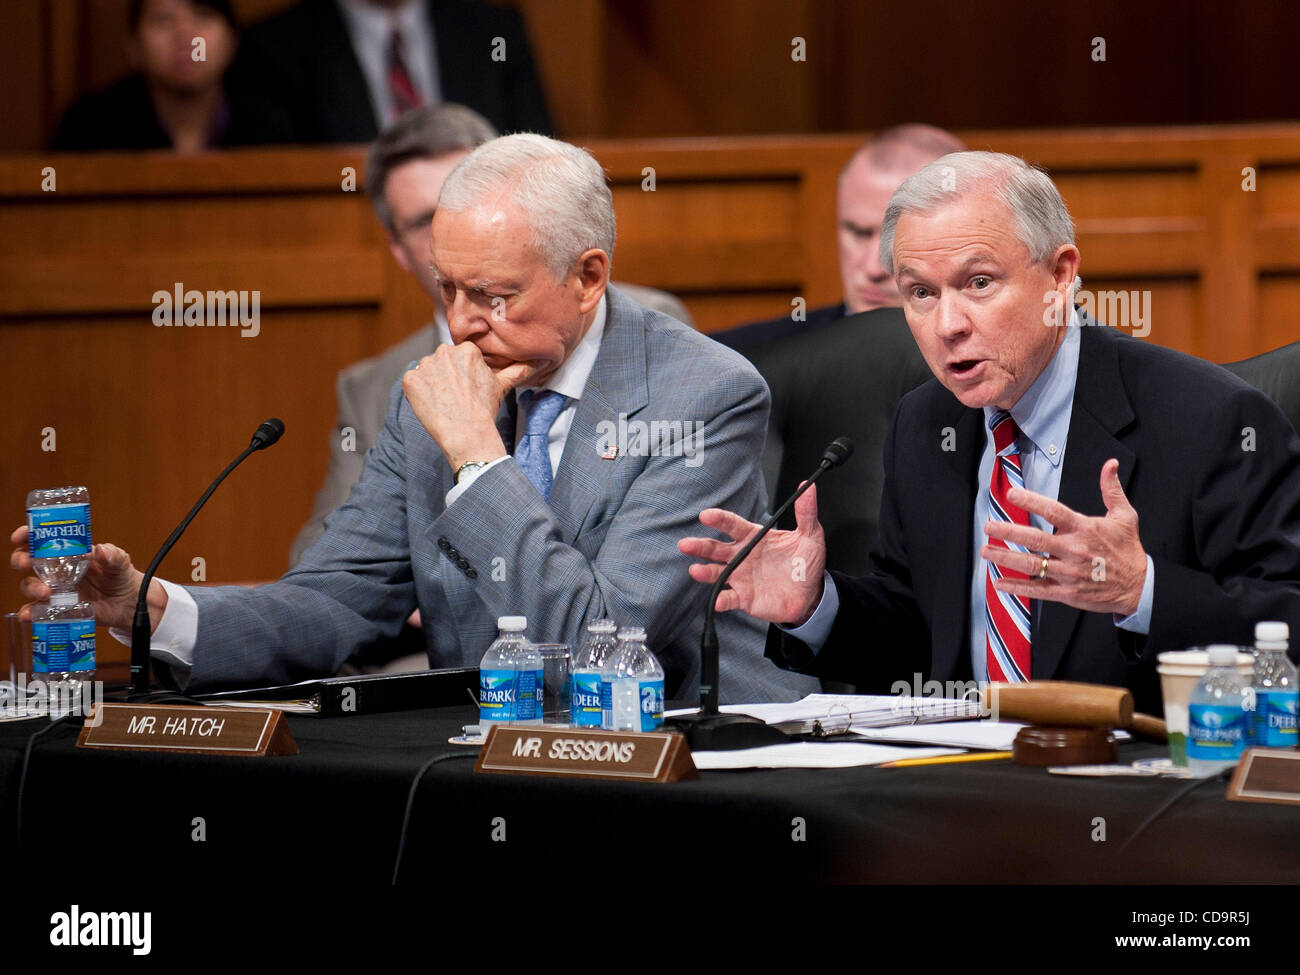 Jul 20, 2010 - Washington, District of Columbia, U.S., - Senator PATRICK LEAHY (D-VT) listens as Senator Spector (D-PA) makes his statement before the the Senate Judiciary Committee voted, 13-6, in favor of Solicitor General KaganÃ•s confirmation to the Supreme Court. The vote was largely along part Stock Photo